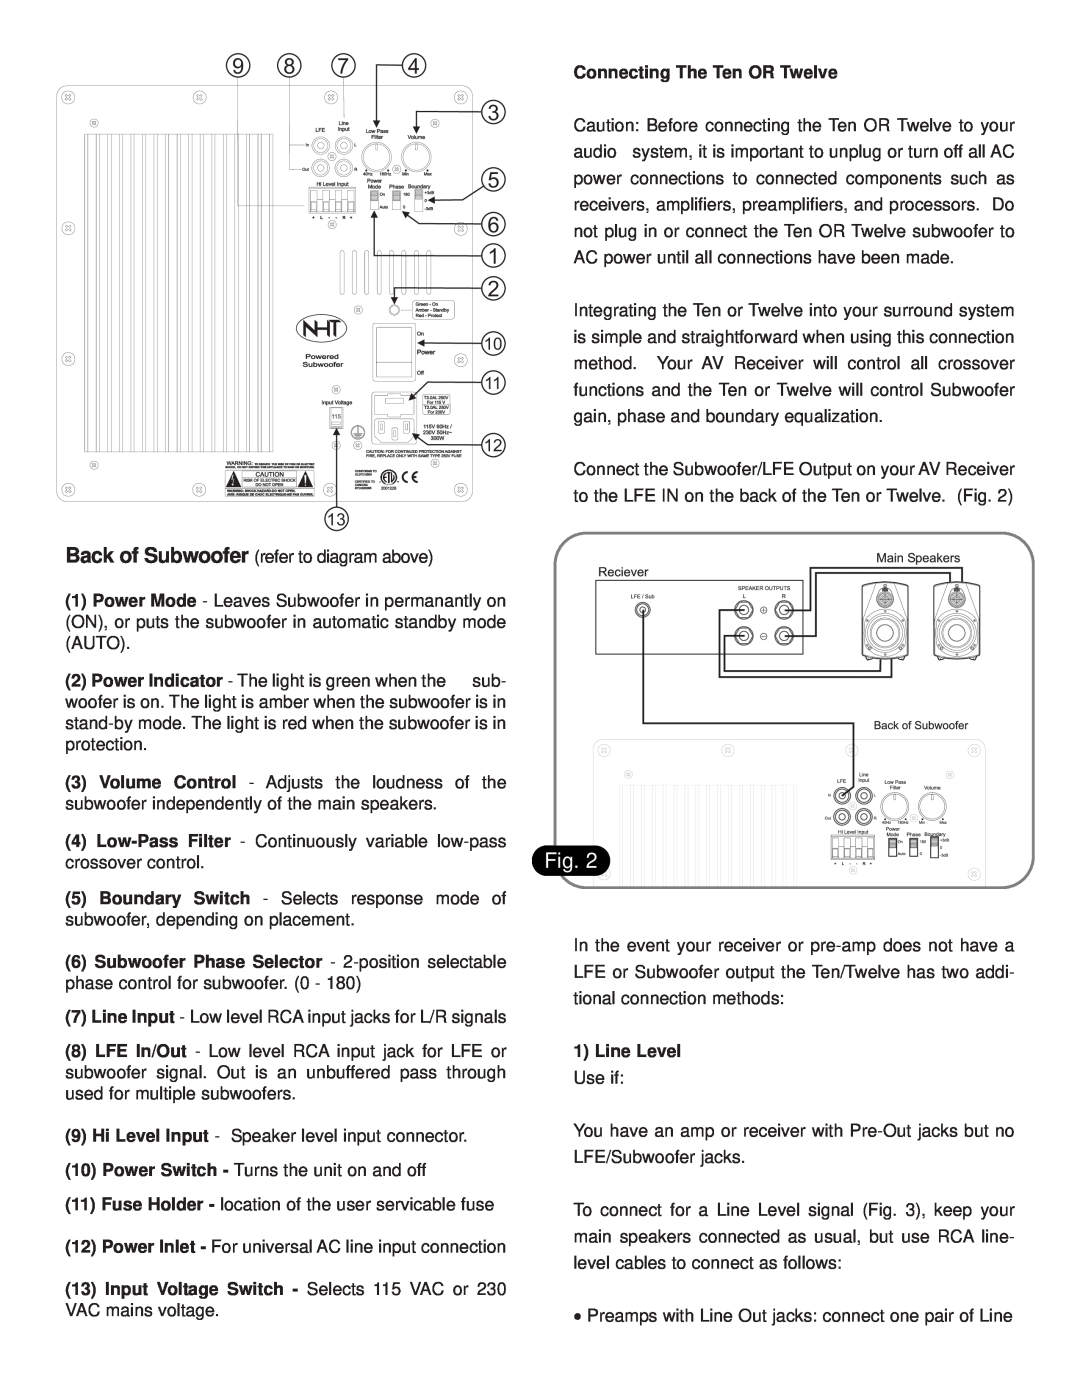 NHT Powered Subwoofers owner manual 3 5, Connecting The Ten OR Twelve, 1Line Level Use if 